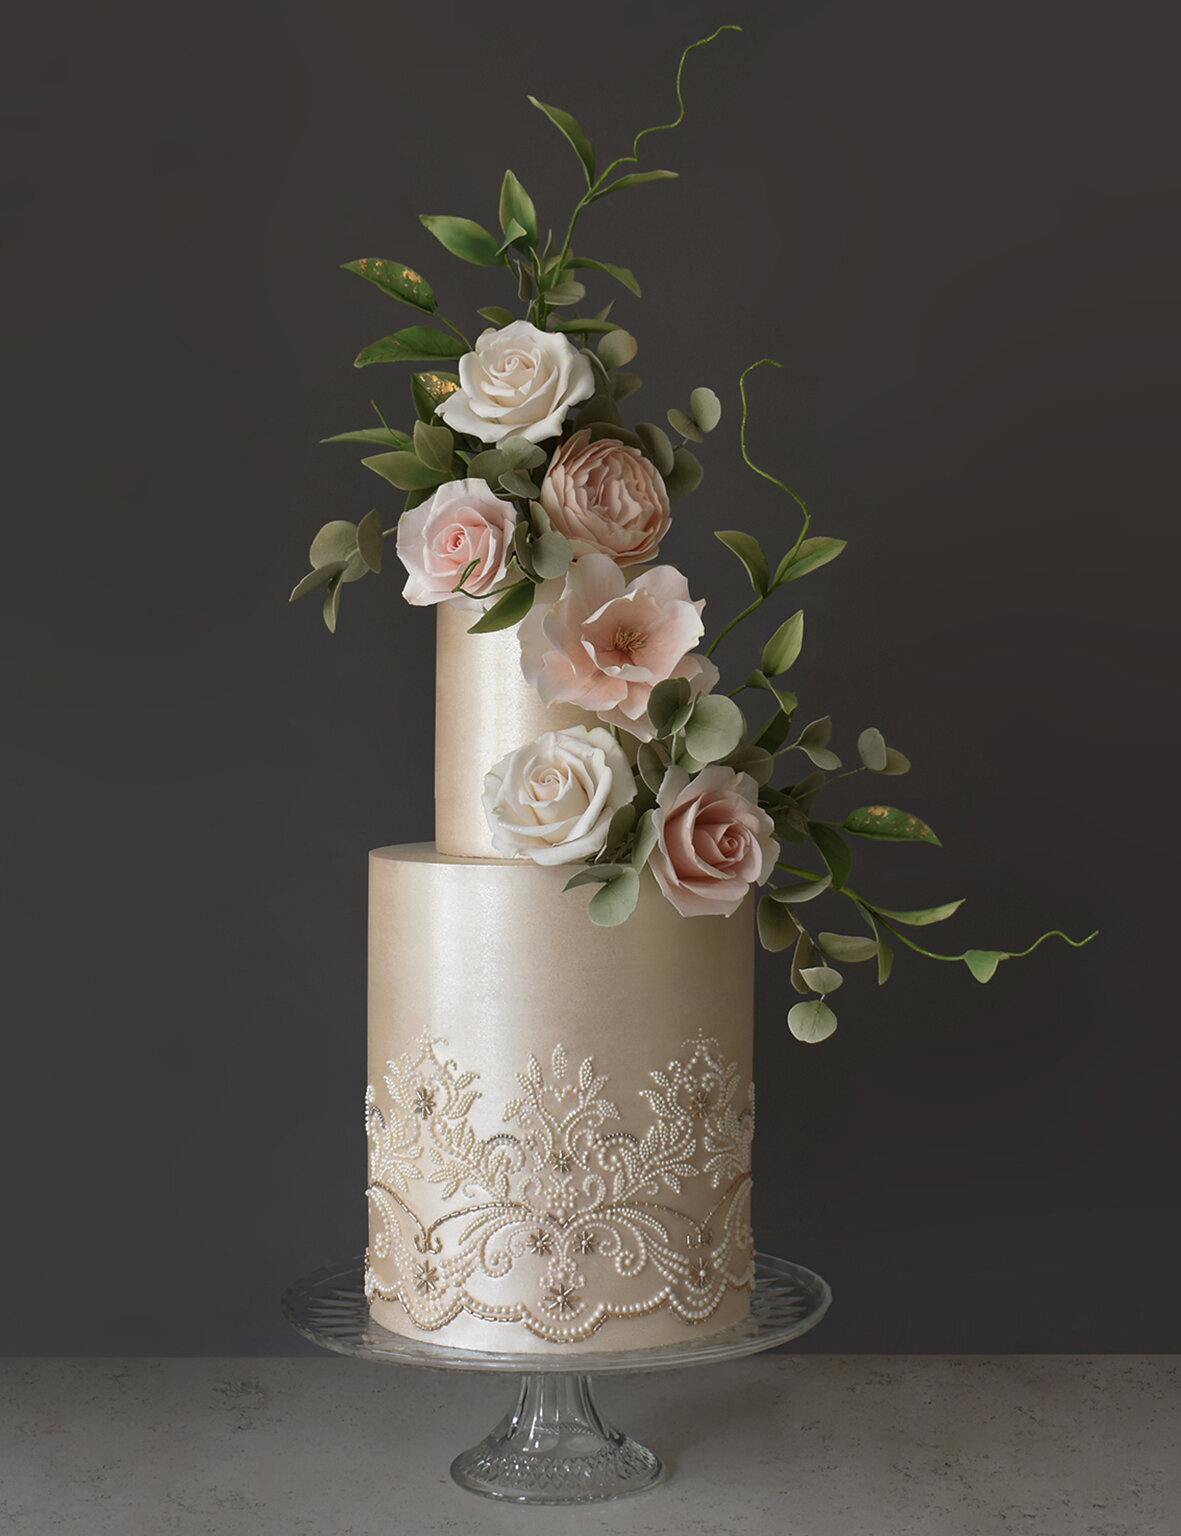 Two tiered wedding cake with satin sheen and intricate pearl lace detail